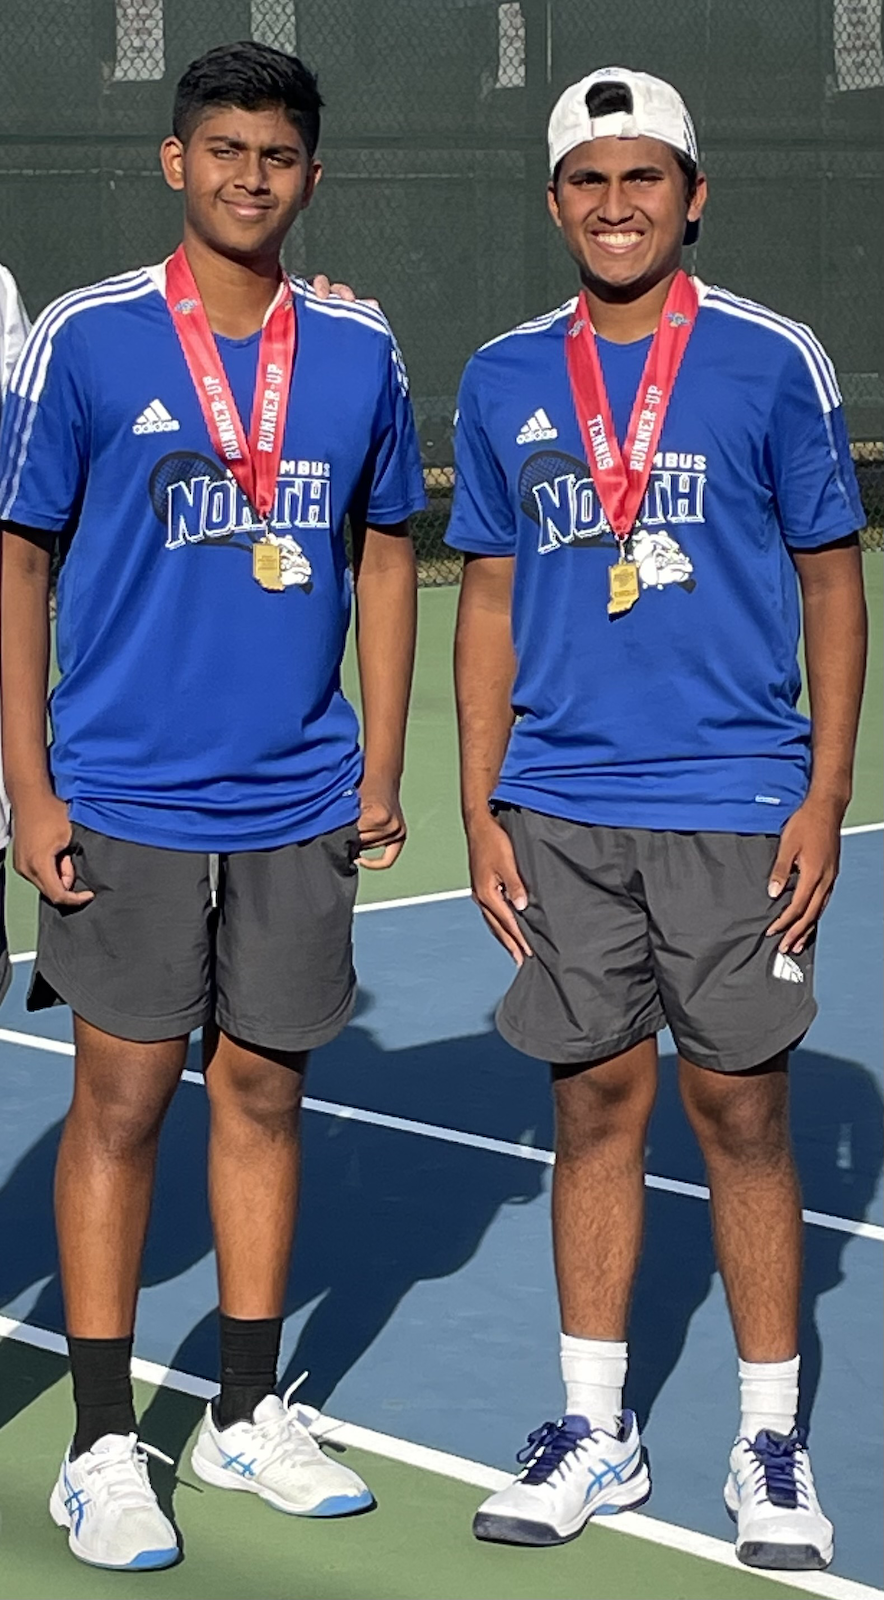 2022 Boys Tennis Doubles State Finals 10-22-22 gallery cover photo